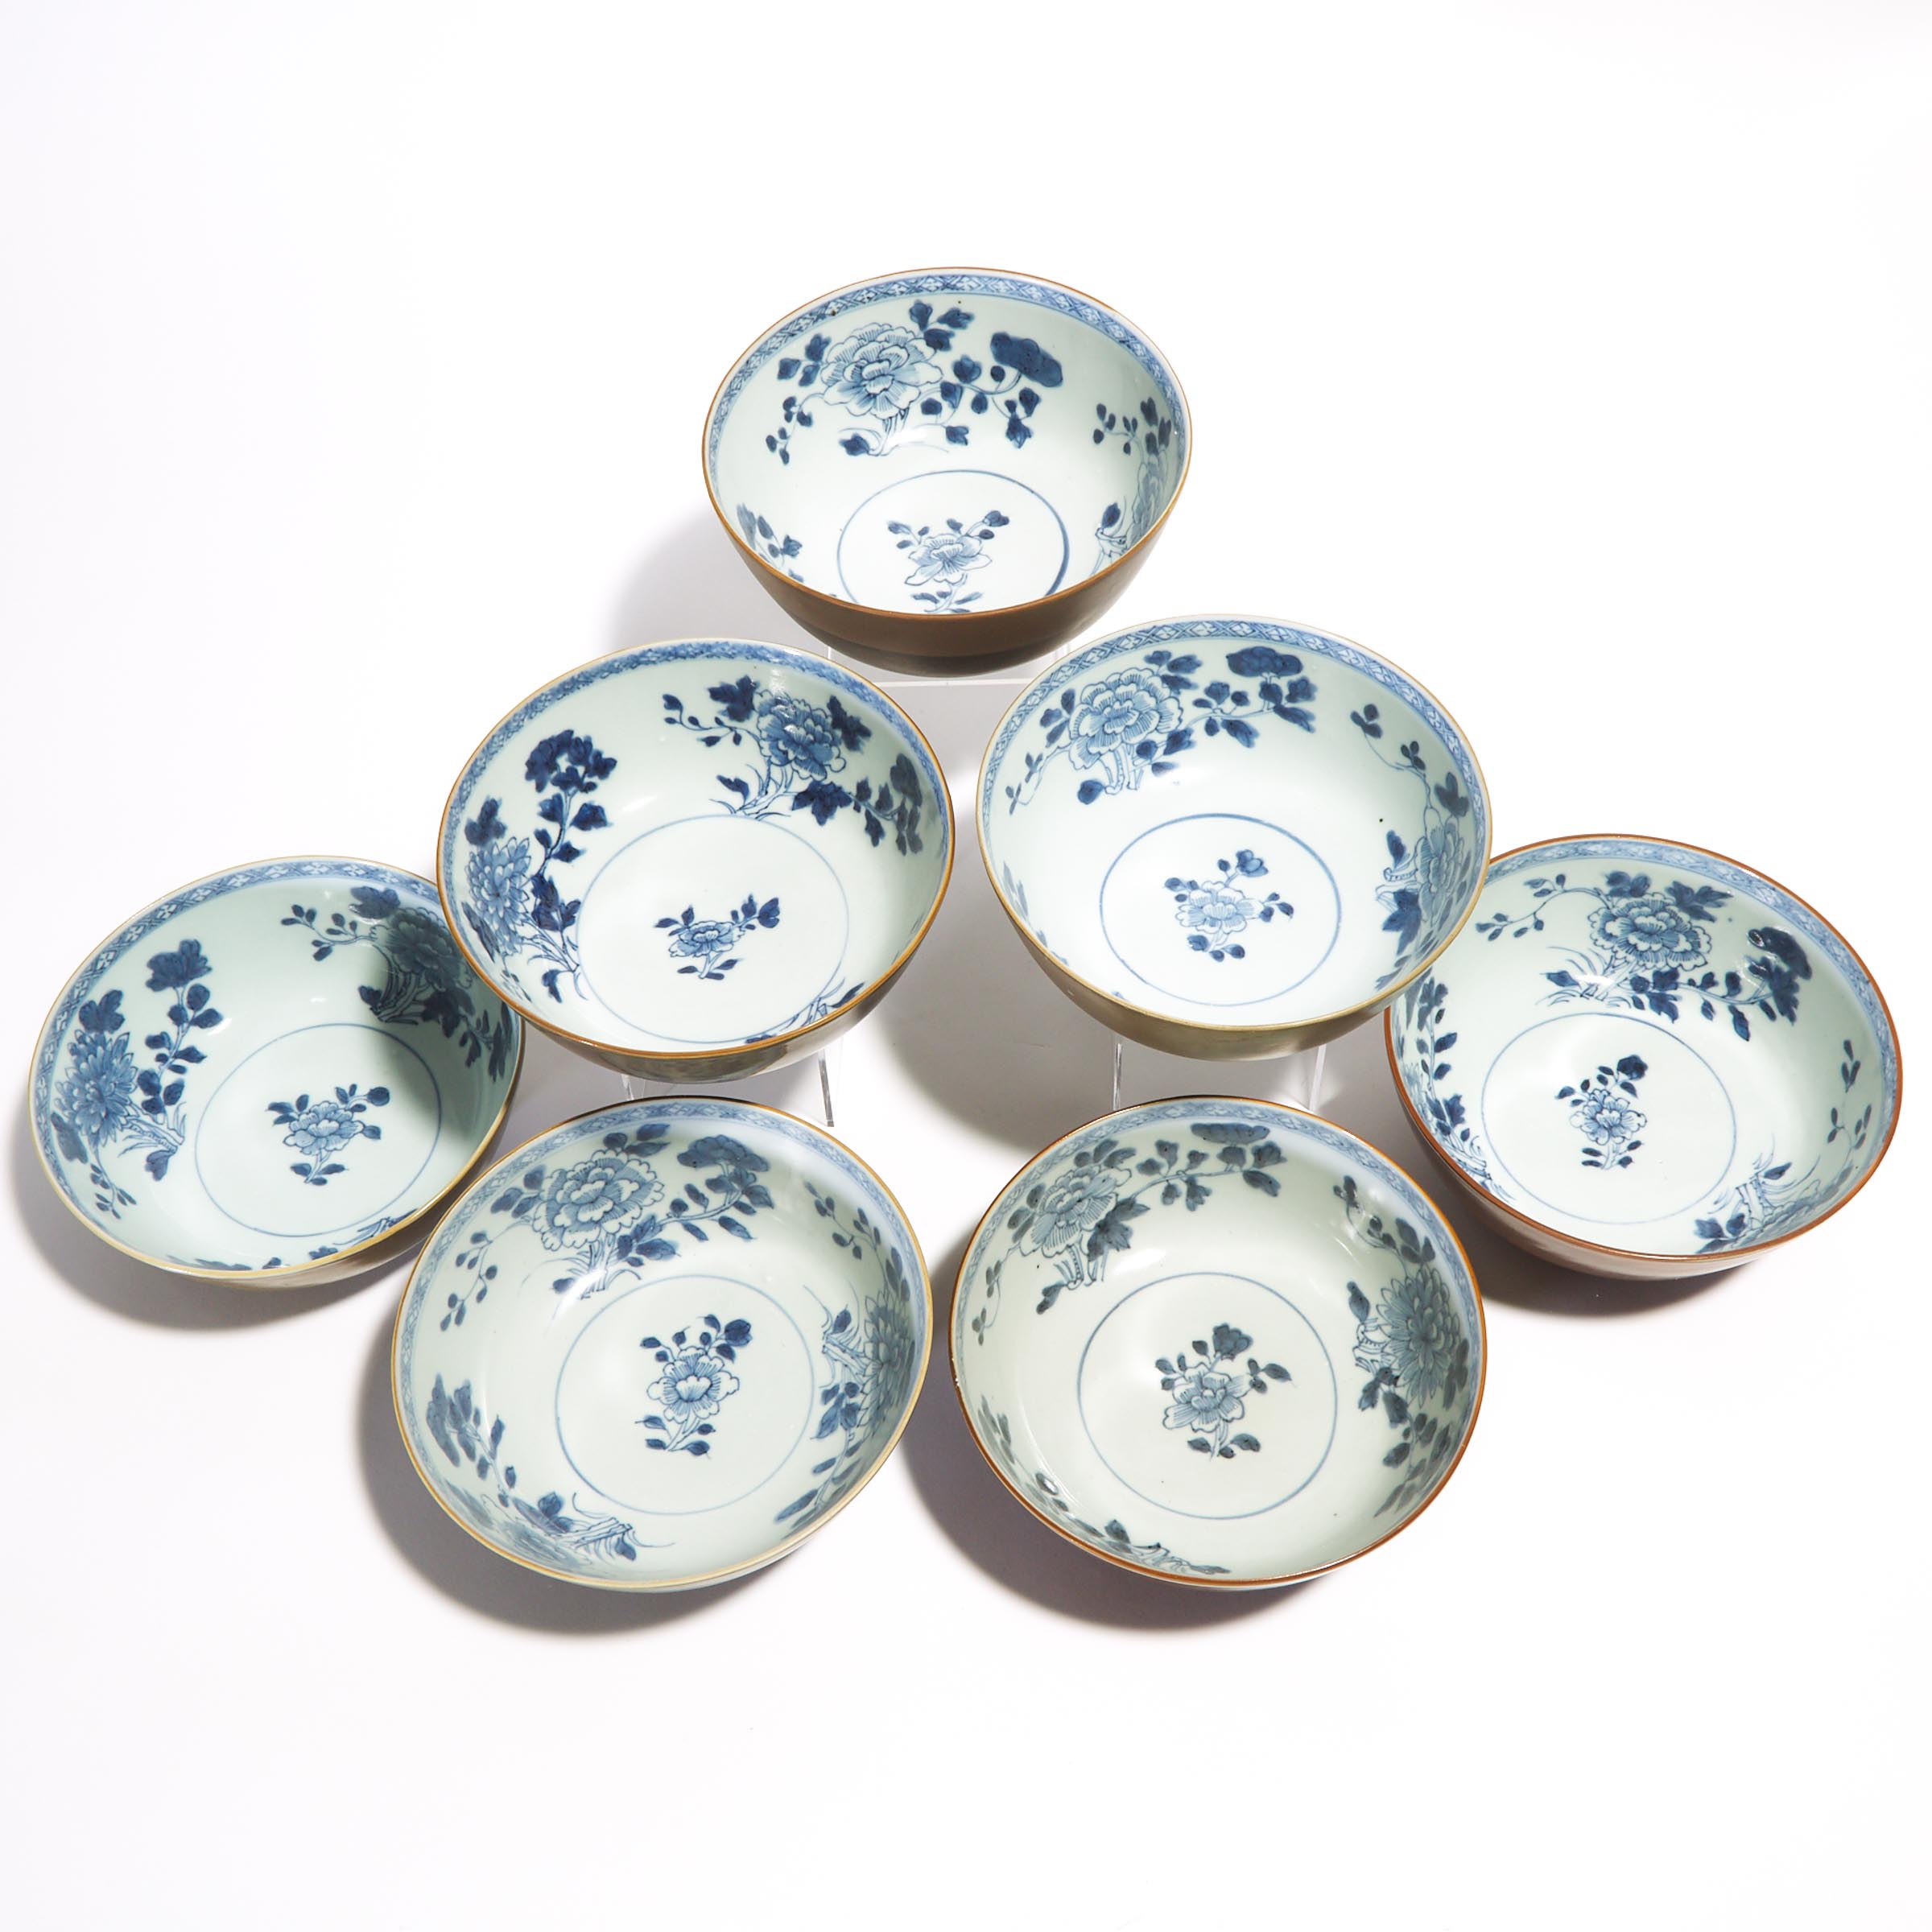 A Set of Seven 'Batavian' Floral Large Bowls from the Nanking Cargo, Qianlong Period, Circa 1750